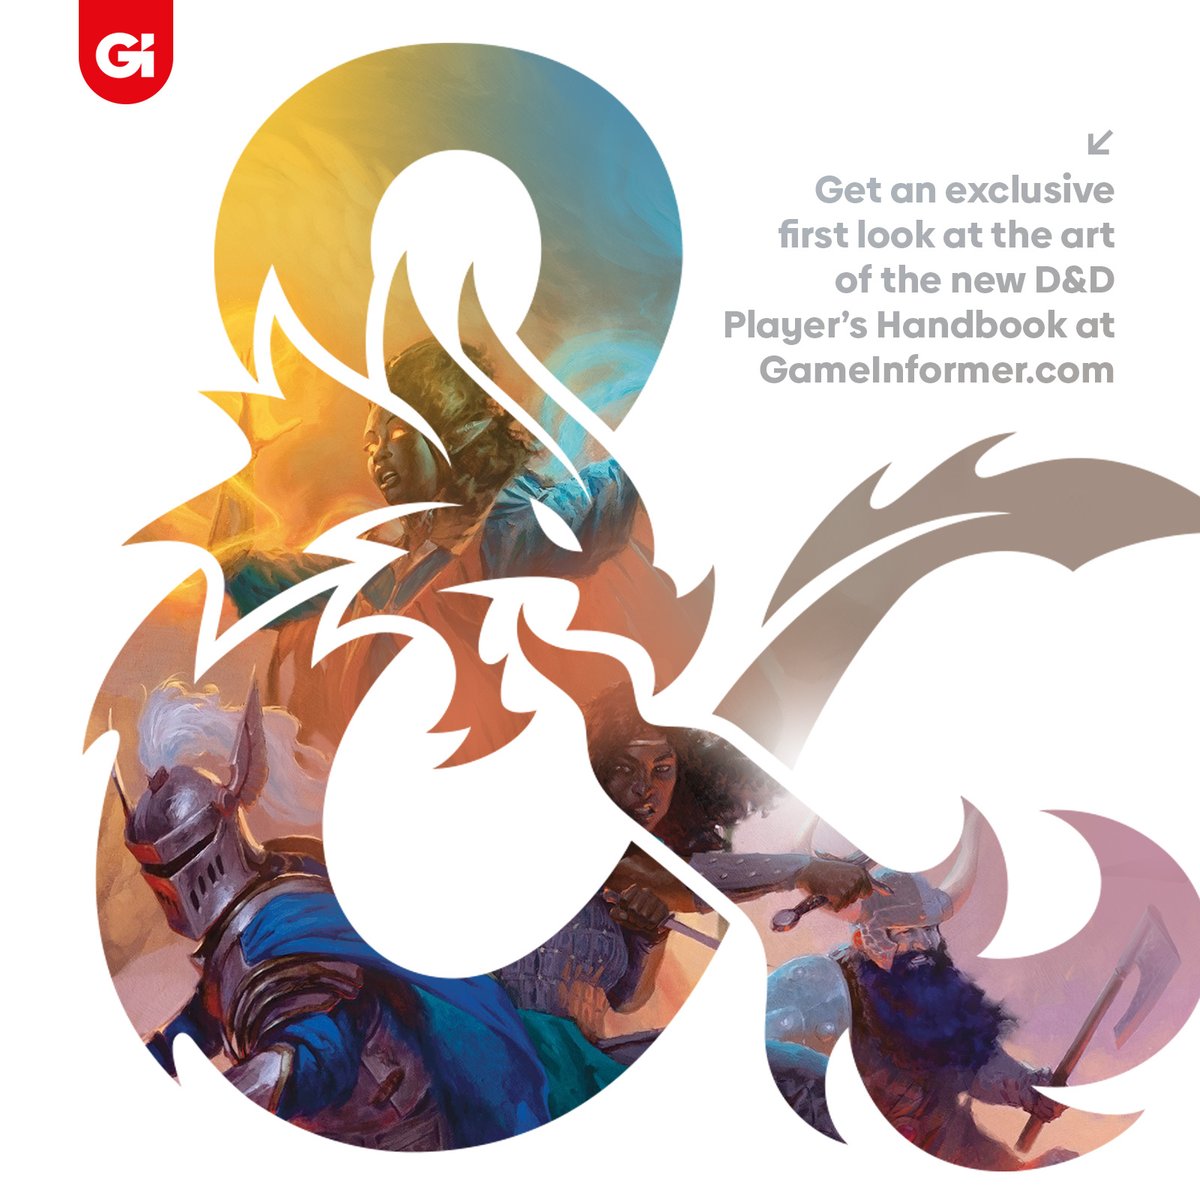 We're thrilled to reveal a first look at the cover art for the new and revised Dungeons & Dragons Player's Handbook, alongside interviews with the team. Check out the Art of the New Dungeons & Dragons. bit.ly/3wBkb0I